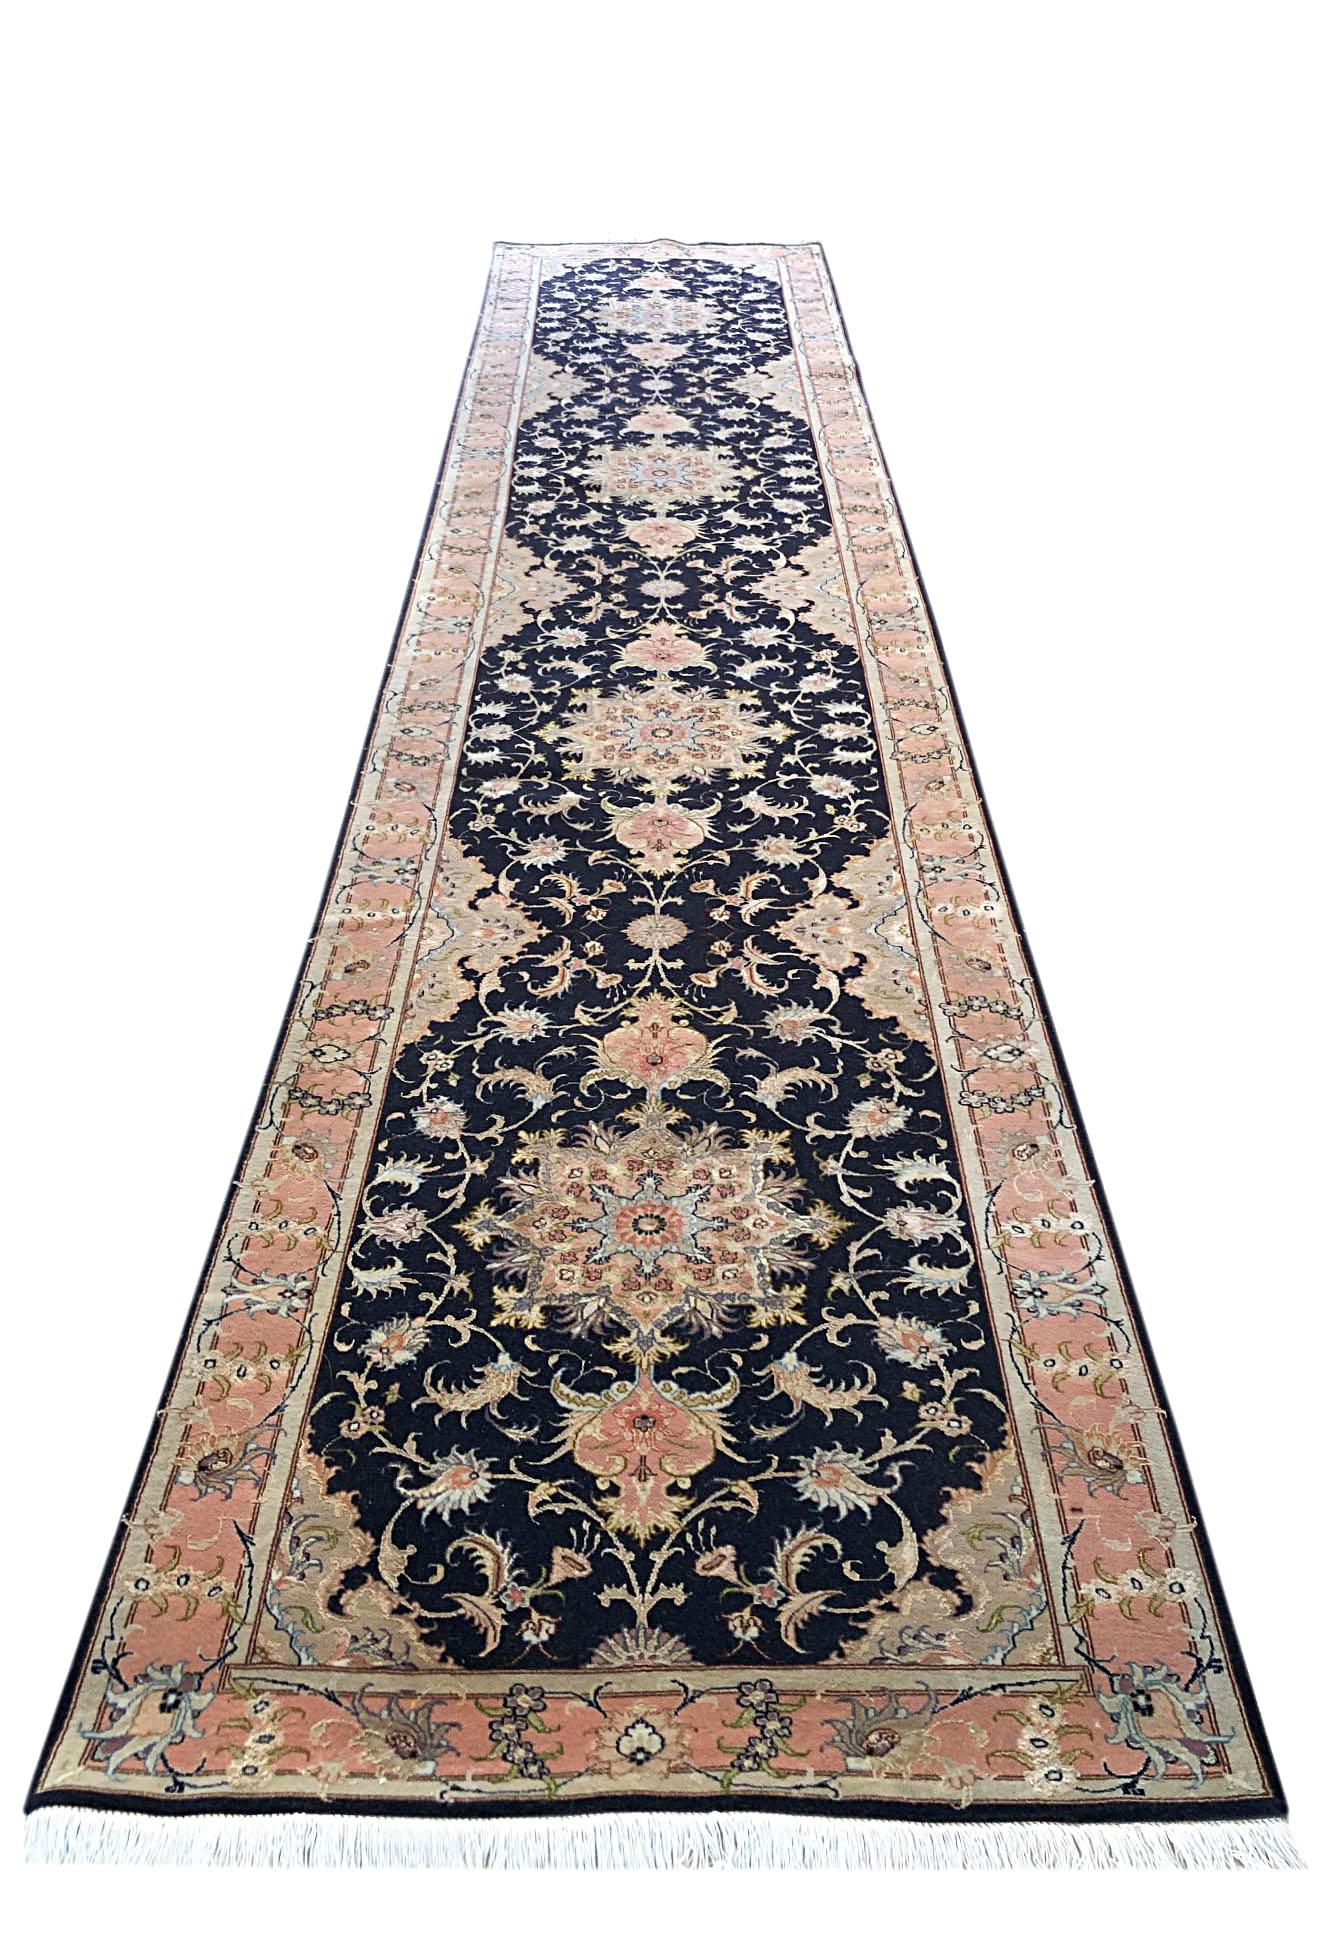 This Persian Tabriz runner has wool and silk pile and cotton foundation. Tabriz rugs are well known for their excellent weaving and design. This rug features a beautiful floral rug pattern that has Black base color with peach border. The size is 3